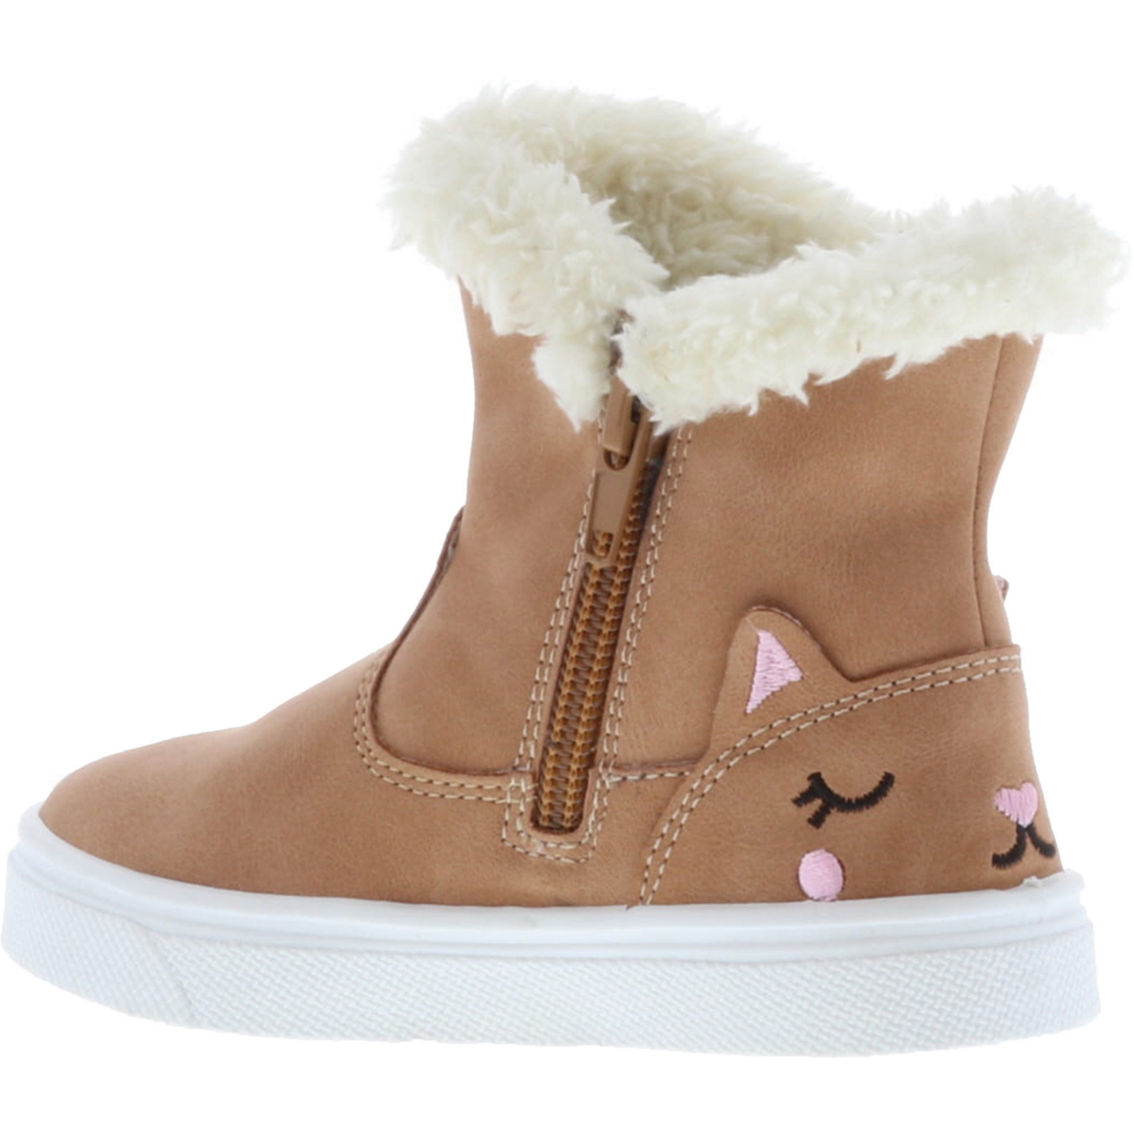 Oomphies Toddler Girls Chilly Boots - Image 2 of 4